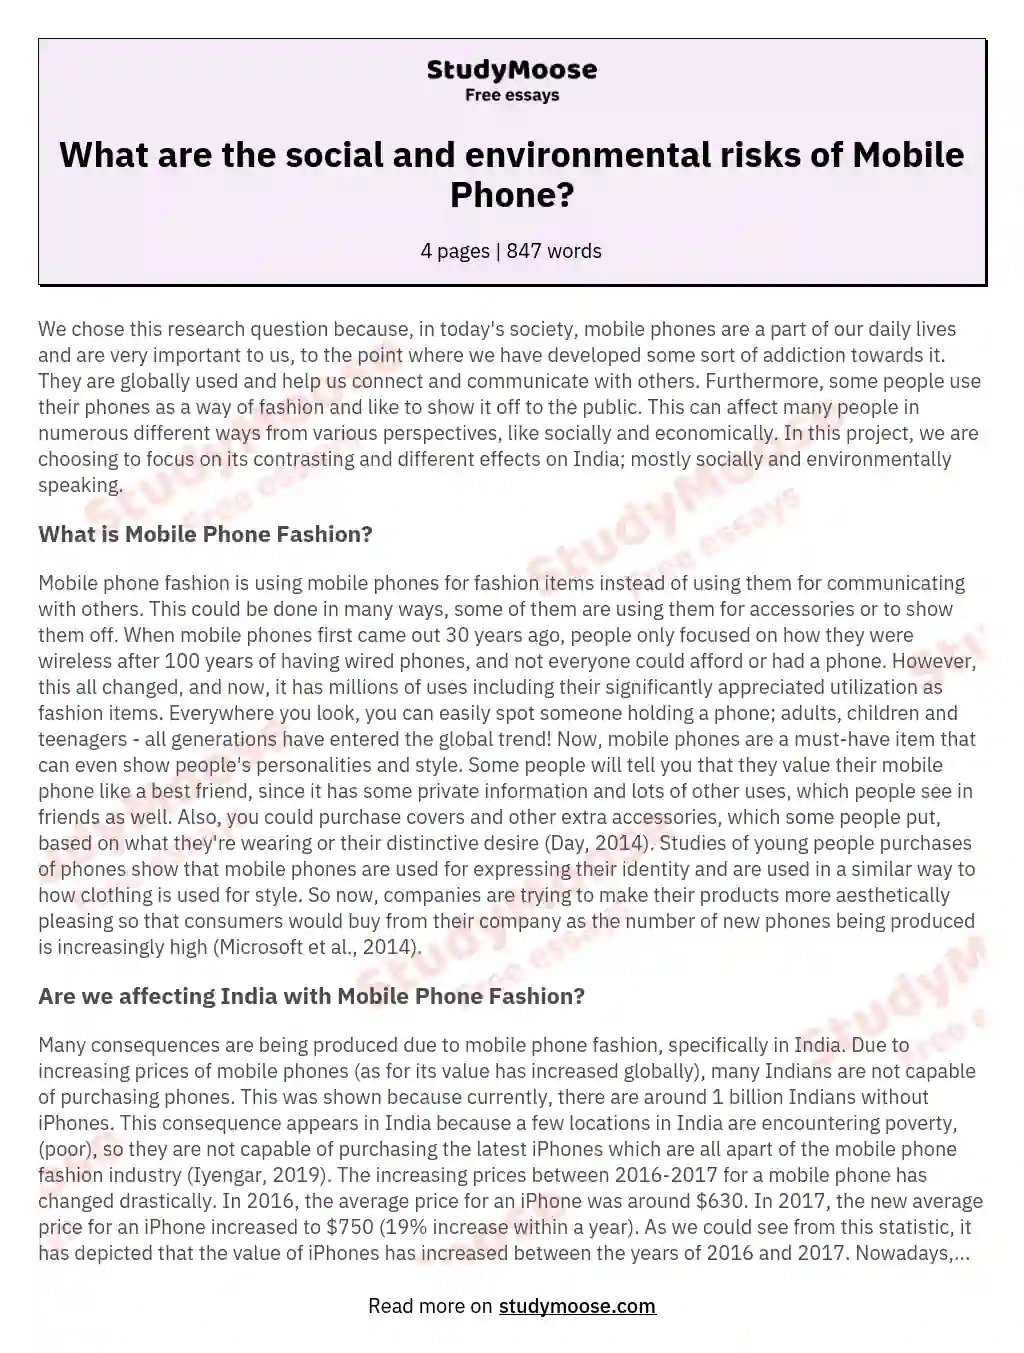 What are the social and environmental risks of Mobile Phone? essay